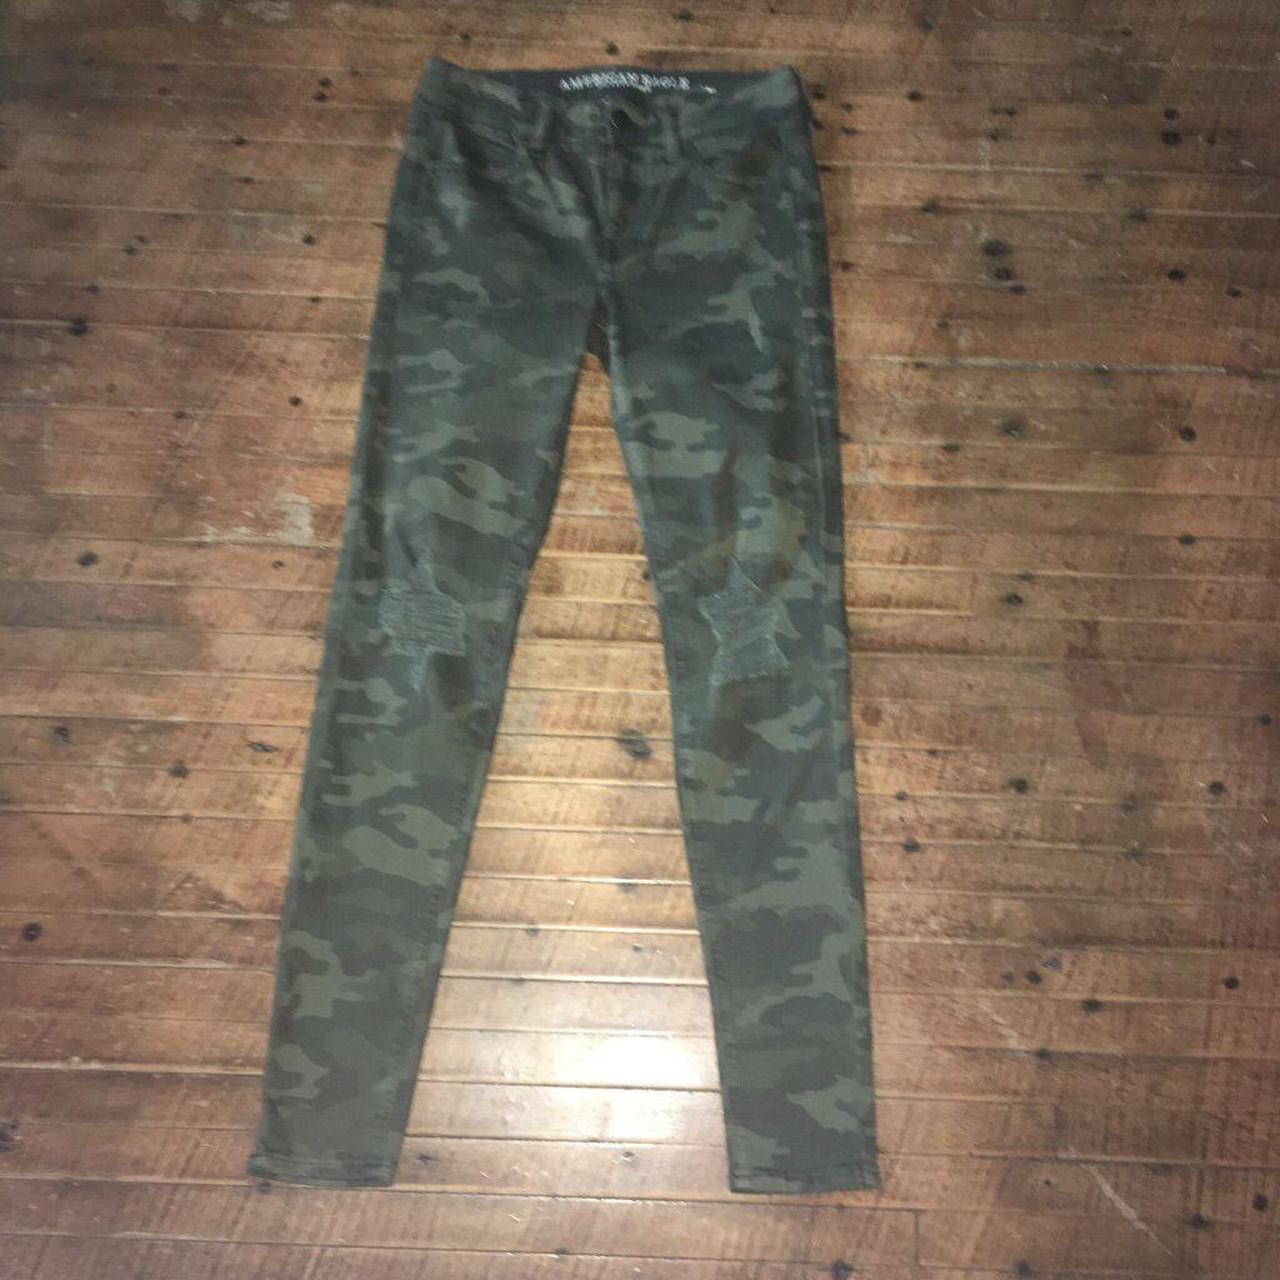 Comfortable, cropped, slimming camo jeggings with - Depop